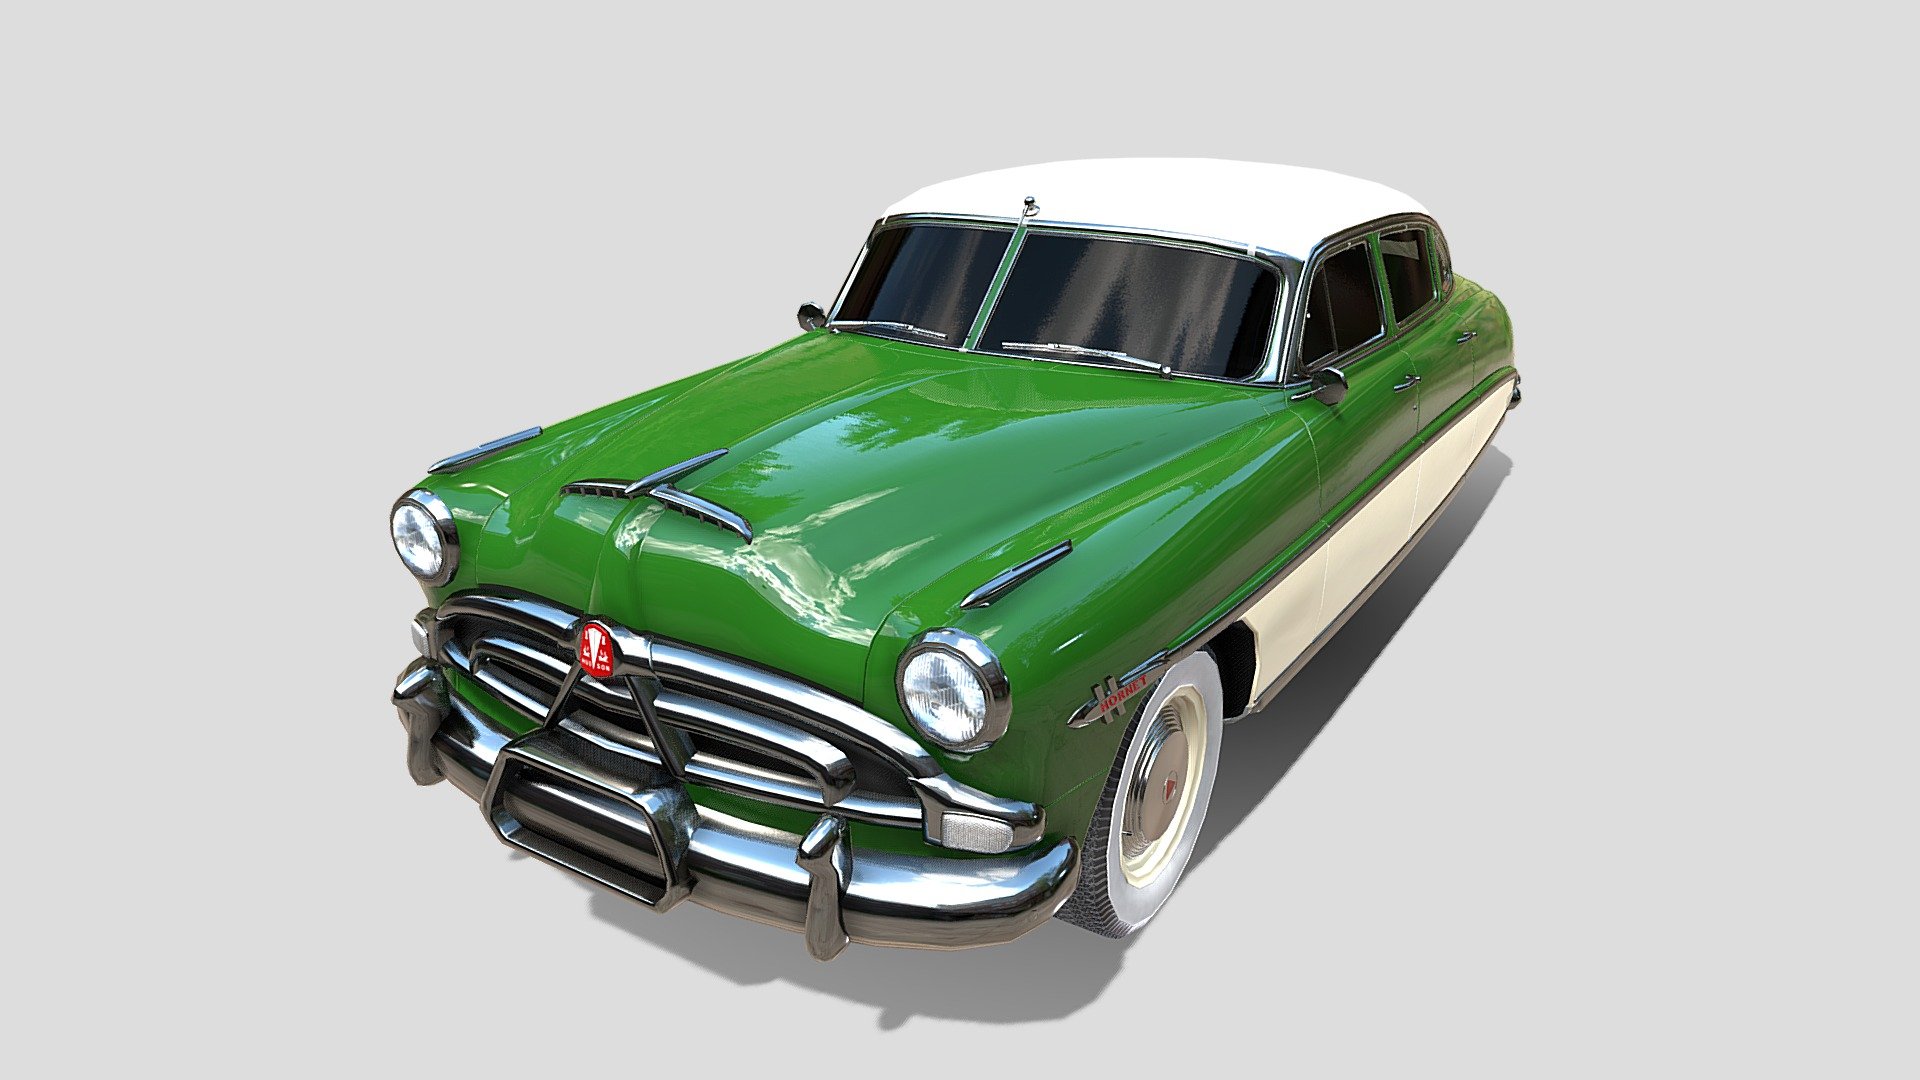 4 Door Hudson Hornet detailed 3d model, rendered with Cycles in Blender, using PBR textures, as per seen on attached images. 
The 3d model is scaled to original size in Blender.

File formats:
-.blend, rendered with cycles, as seen in the images;
-.obj, with materials applied;
-.dae, with materials applied;
-.fbx, with materials applied;
-.stl;

Files come named appropriately and split by file format.

3D Software:
The 3D model was originally created in Blender 3.1 and rendered with Cycles.

Materials and textures:
The models have materials applied in all formats, and are ready to import and render.
Materials are image based using PBR, the model comes with two materials, with five 4k PBR png image textures each corresponding to:
-exterior;
-wheels; - 4 Door Hudson Hornet v1 - Buy Royalty Free 3D model by dragosburian 3d model